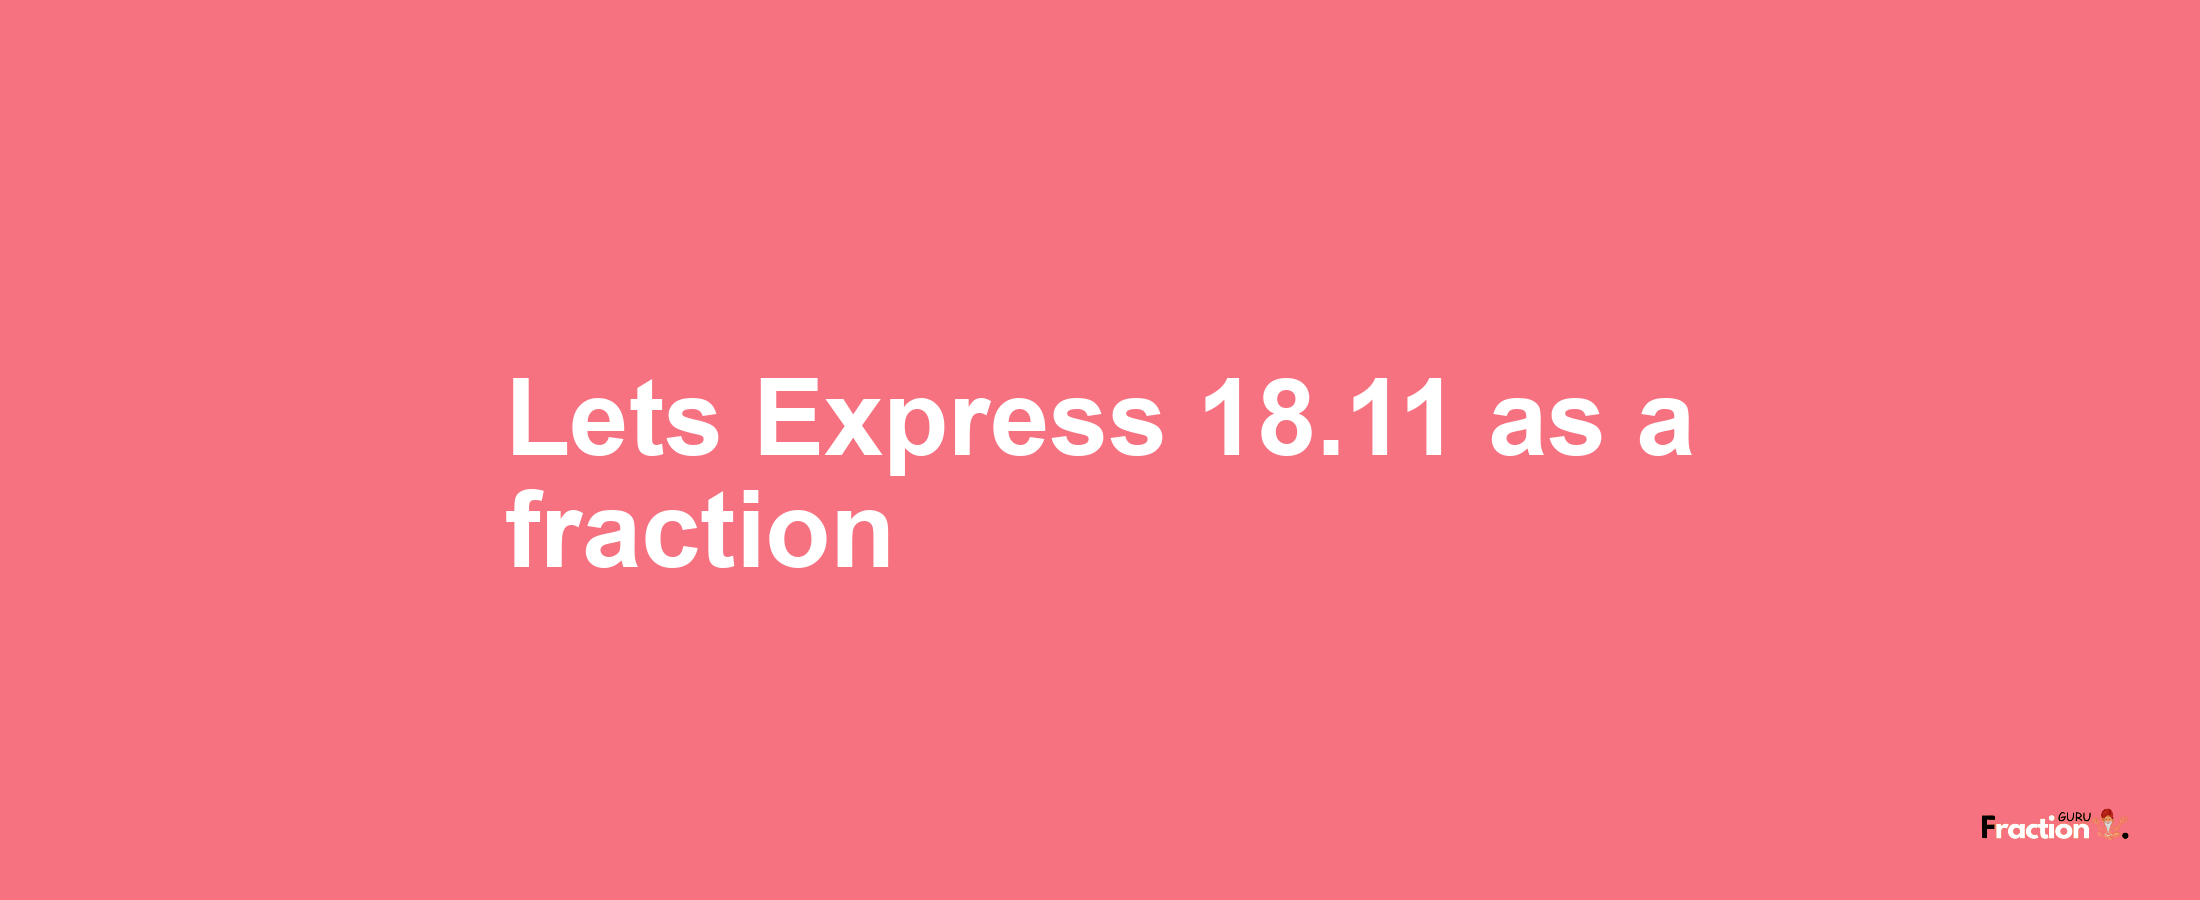 Lets Express 18.11 as afraction